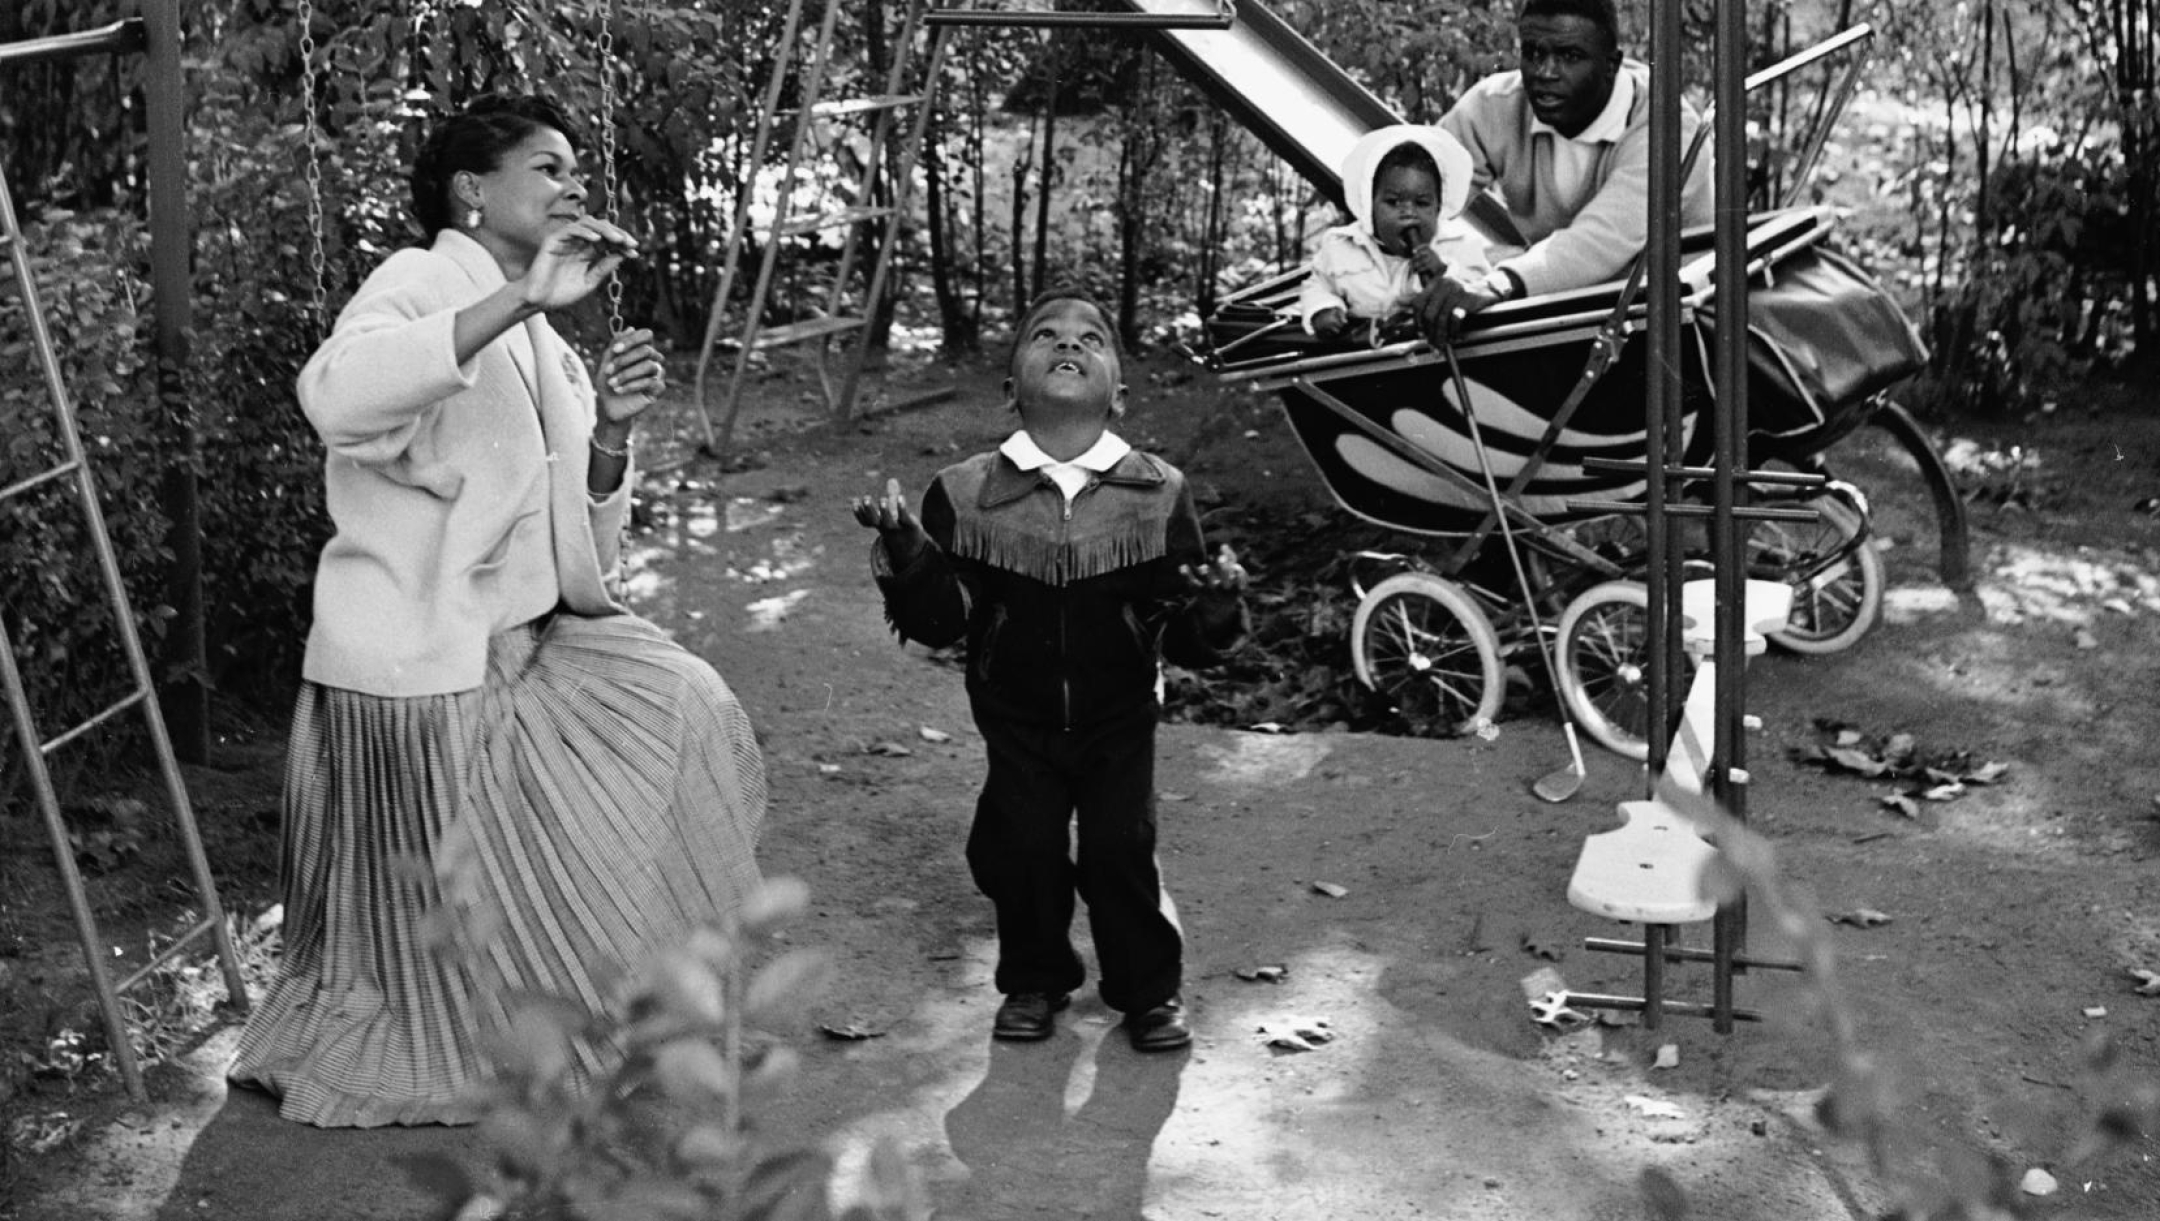 American baseball player Jackie Robinson and his wife Rachel play with son Jackie Jr. (L) and daughter Sharon  in the backyard of their home in Stamford, Connecticut, circa 1951.  (Photo by Hulton Archive/Getty Images)